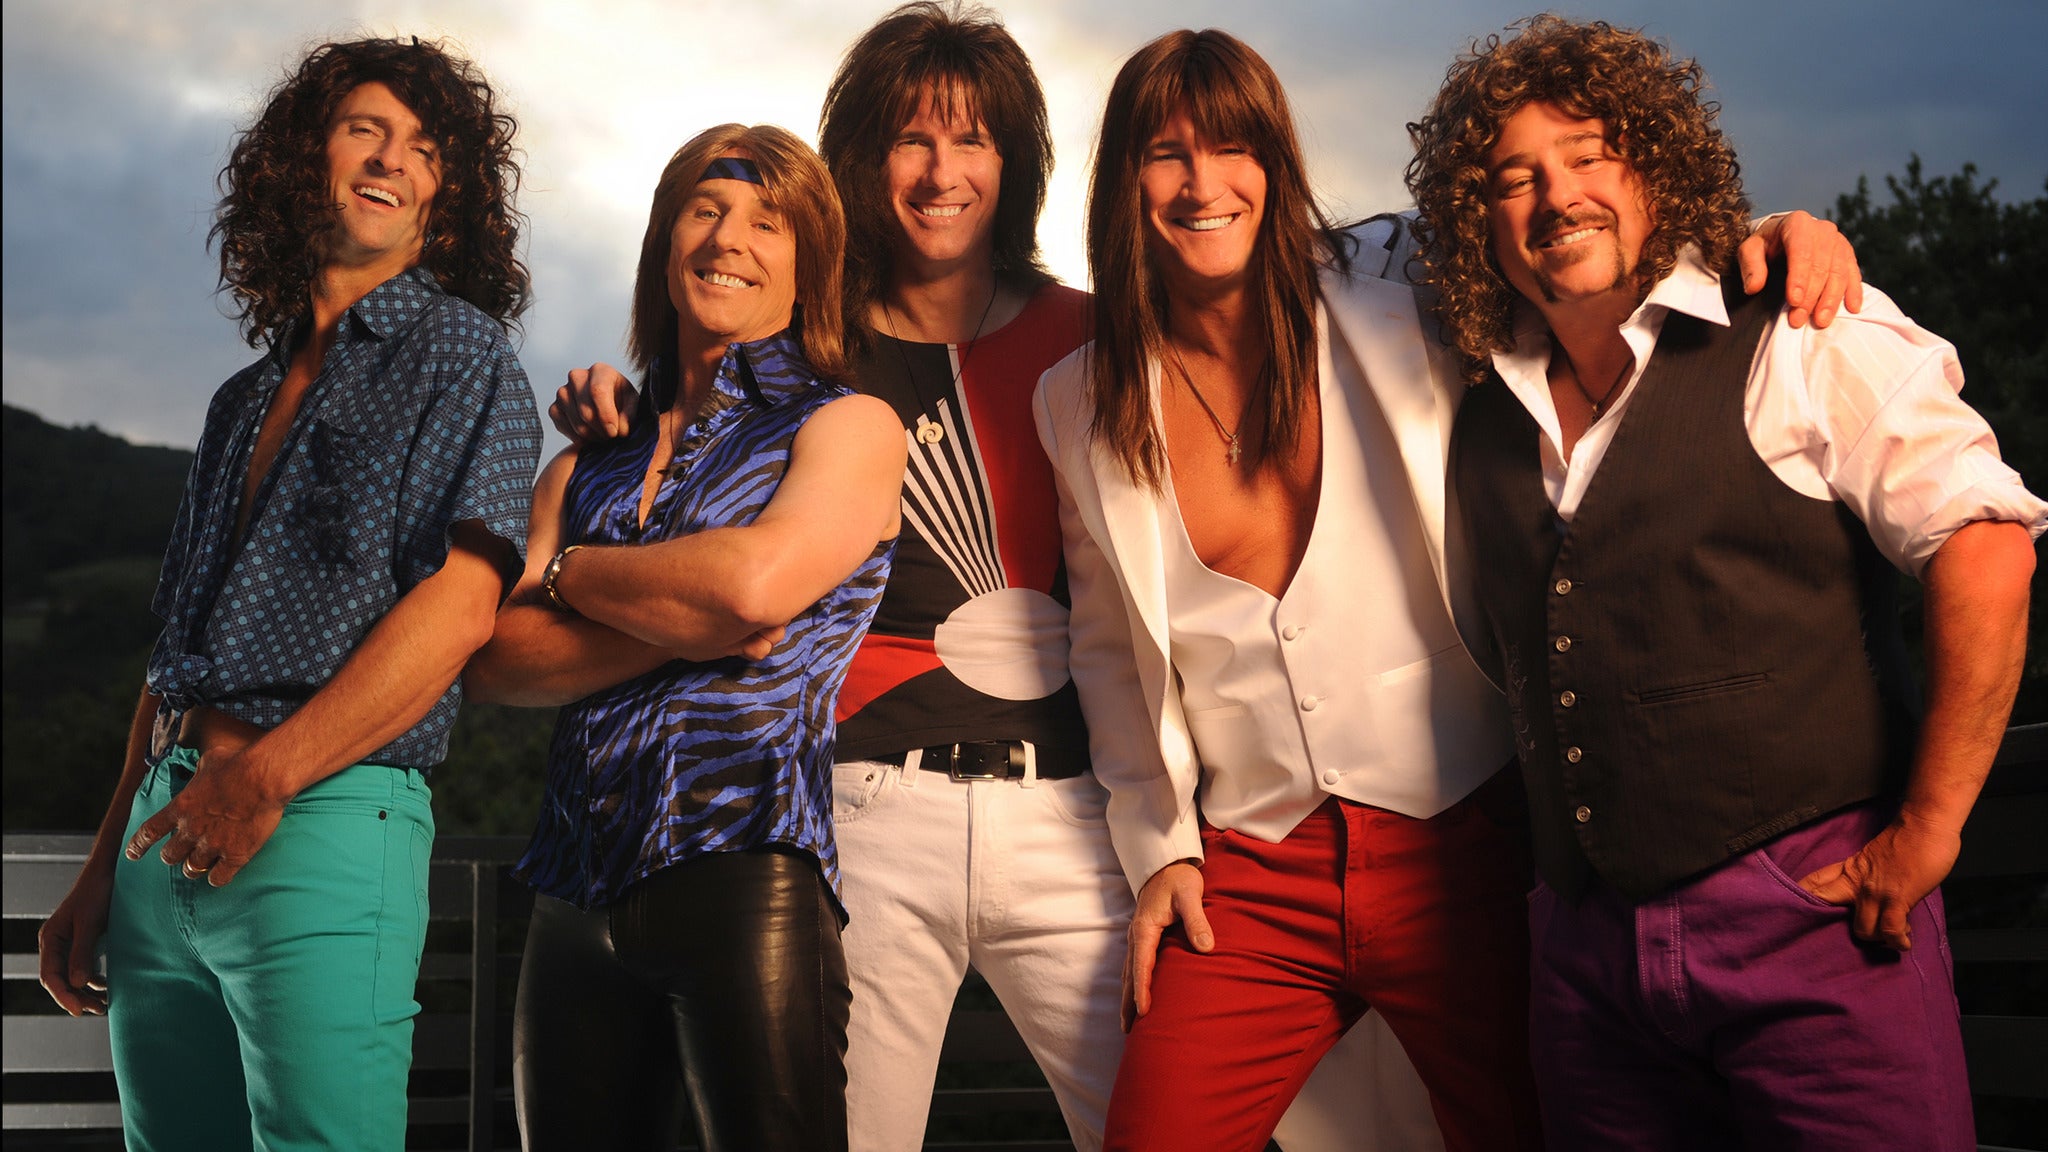 Journey Unauthorized - #1 Journey Tribute Band in America presale code